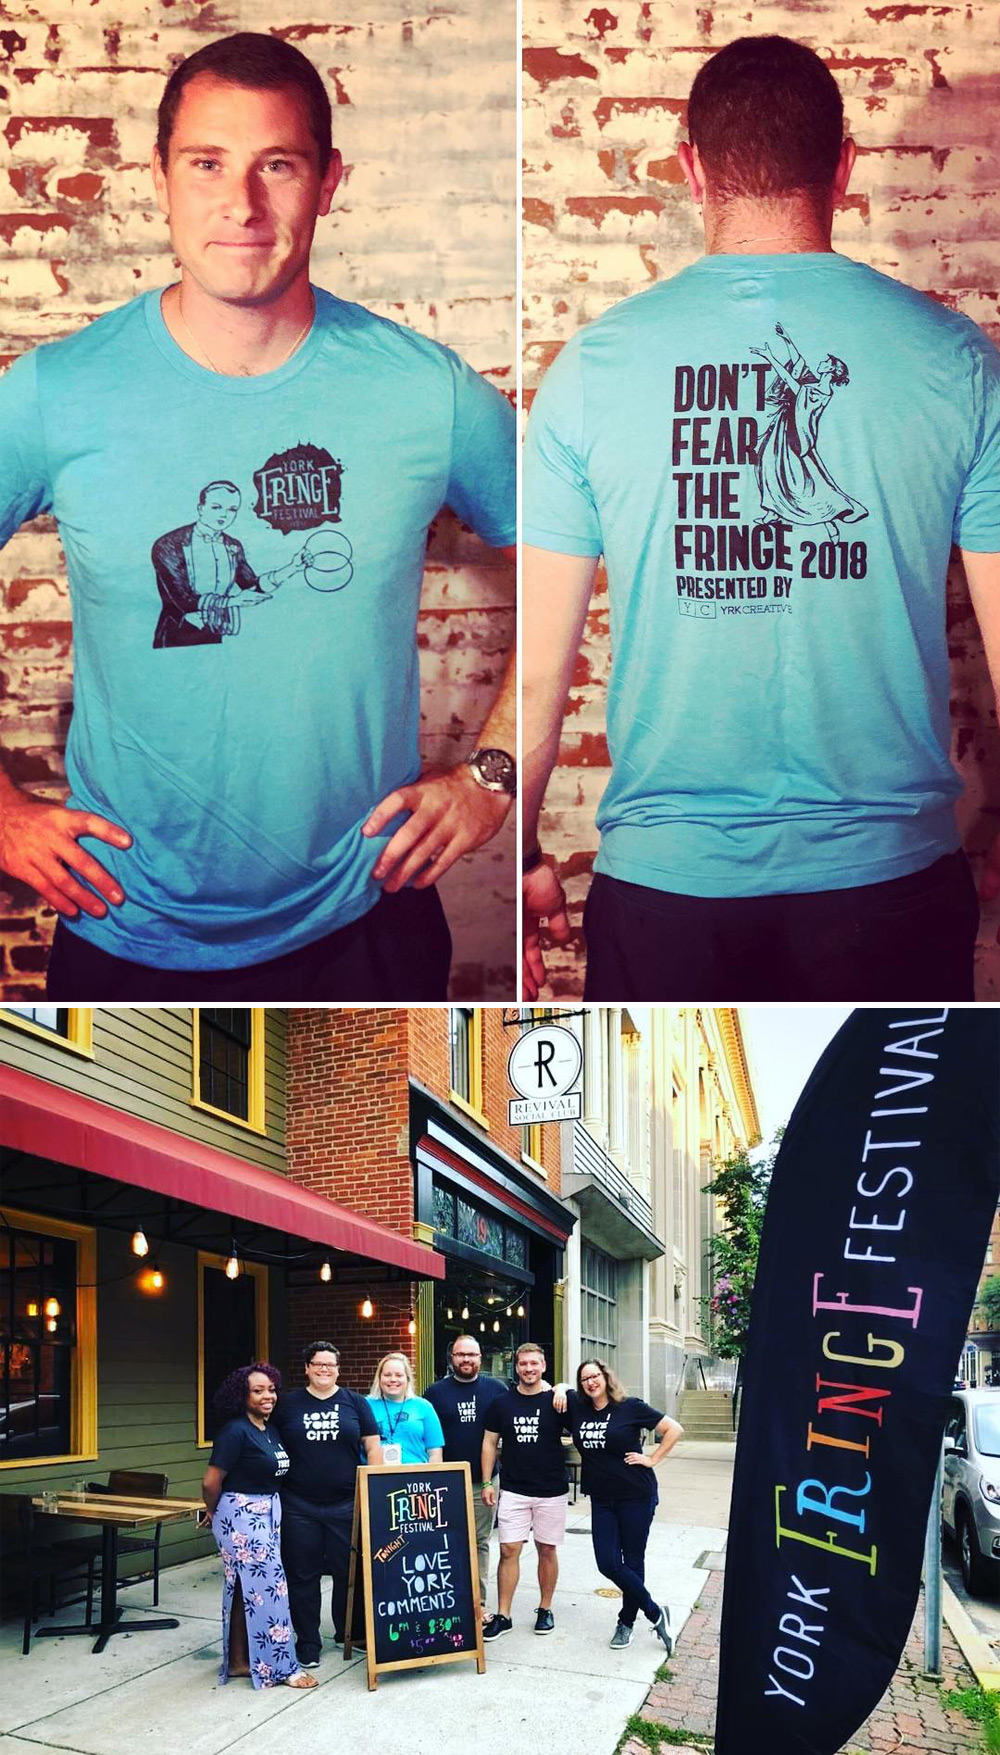 Shirts and banners featuring the York Fringe Festival branding